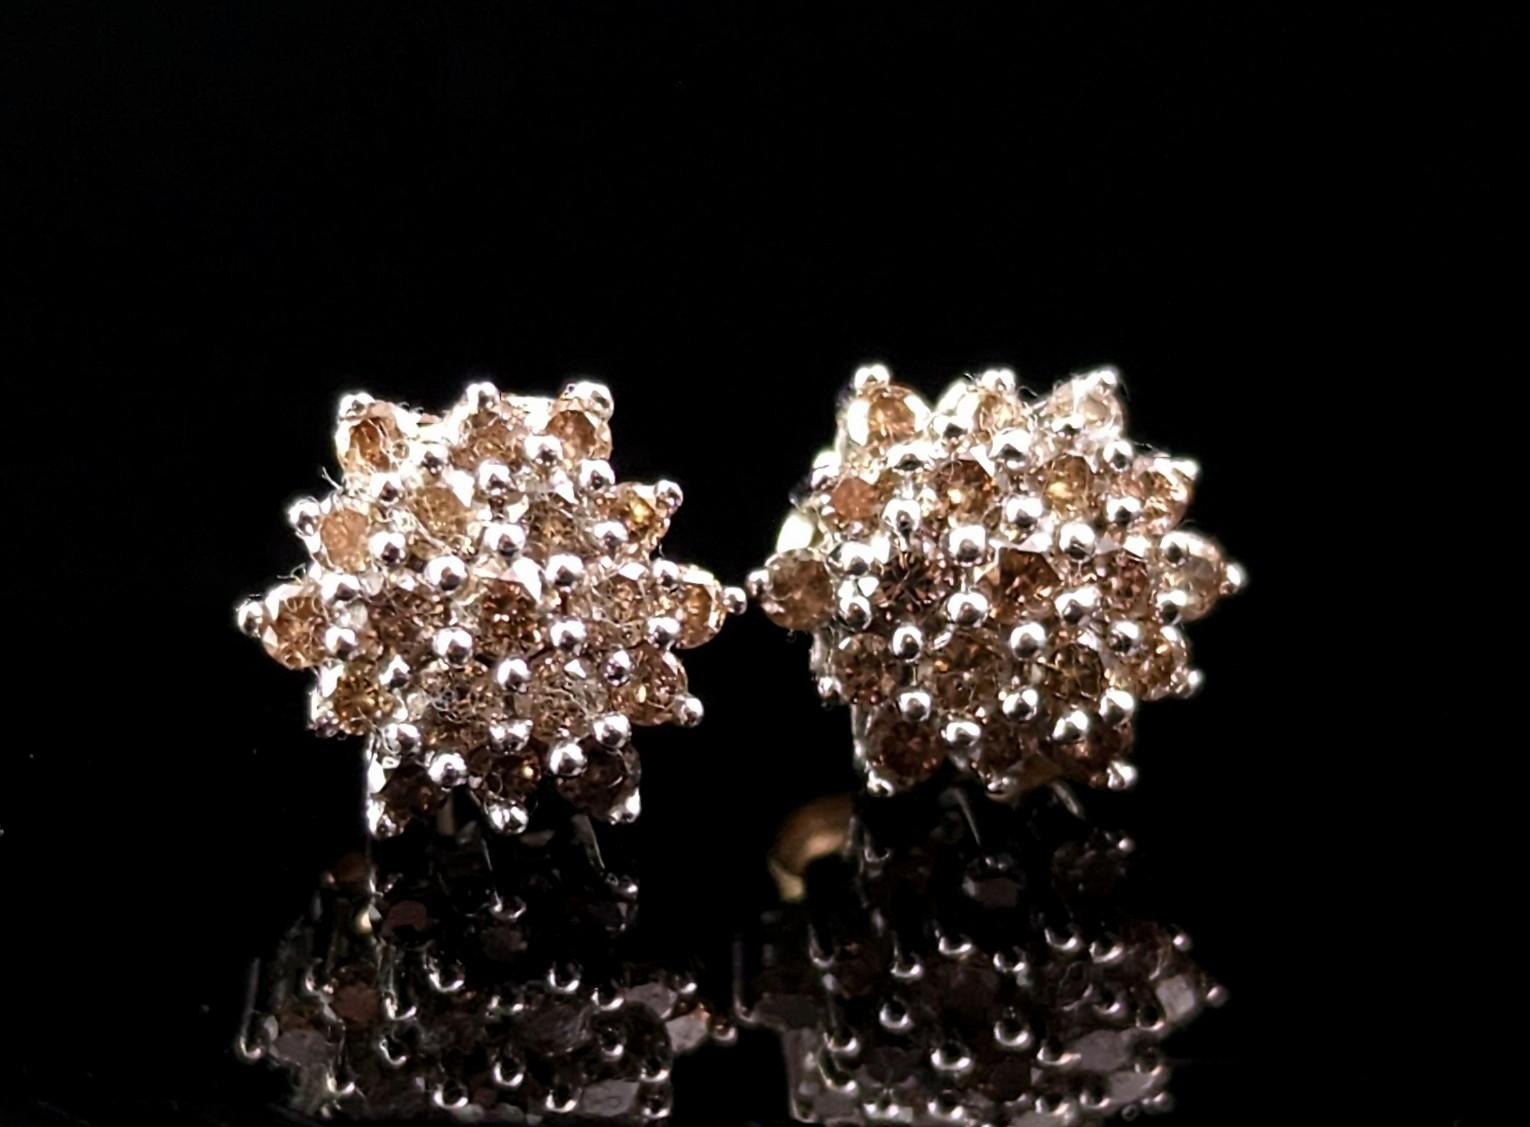 A stunning pair of vintage brilliant cut brown diamond stud earrings.

A classic and timeless jewellery staple these classy diamond studs have a different twist with the fancy brown diamonds, the diamonds are set into 9ct white gold enhancing the